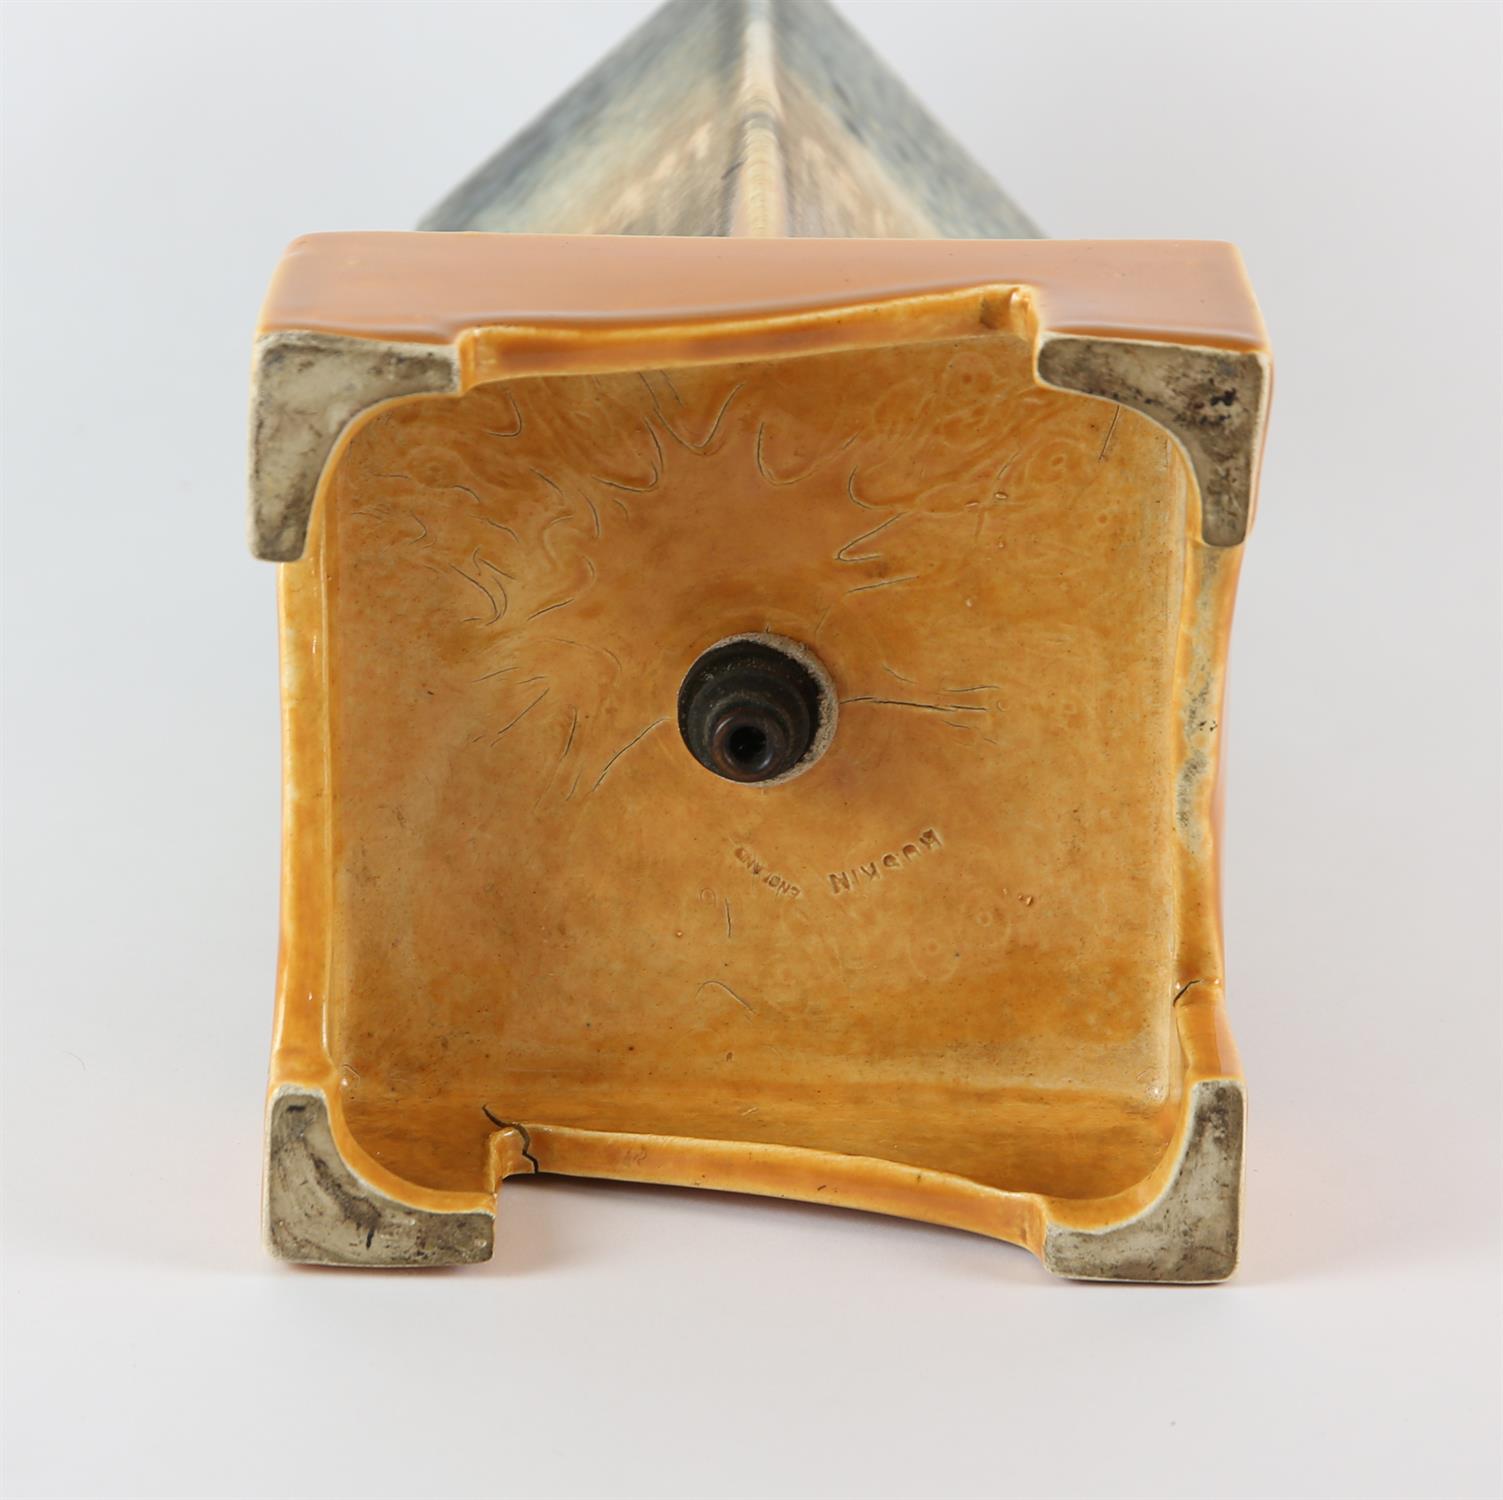 RUSKIN, ENGLAND, a rectangular pottery lamp, on square base, decorated with orange and blue glazes, - Image 2 of 2